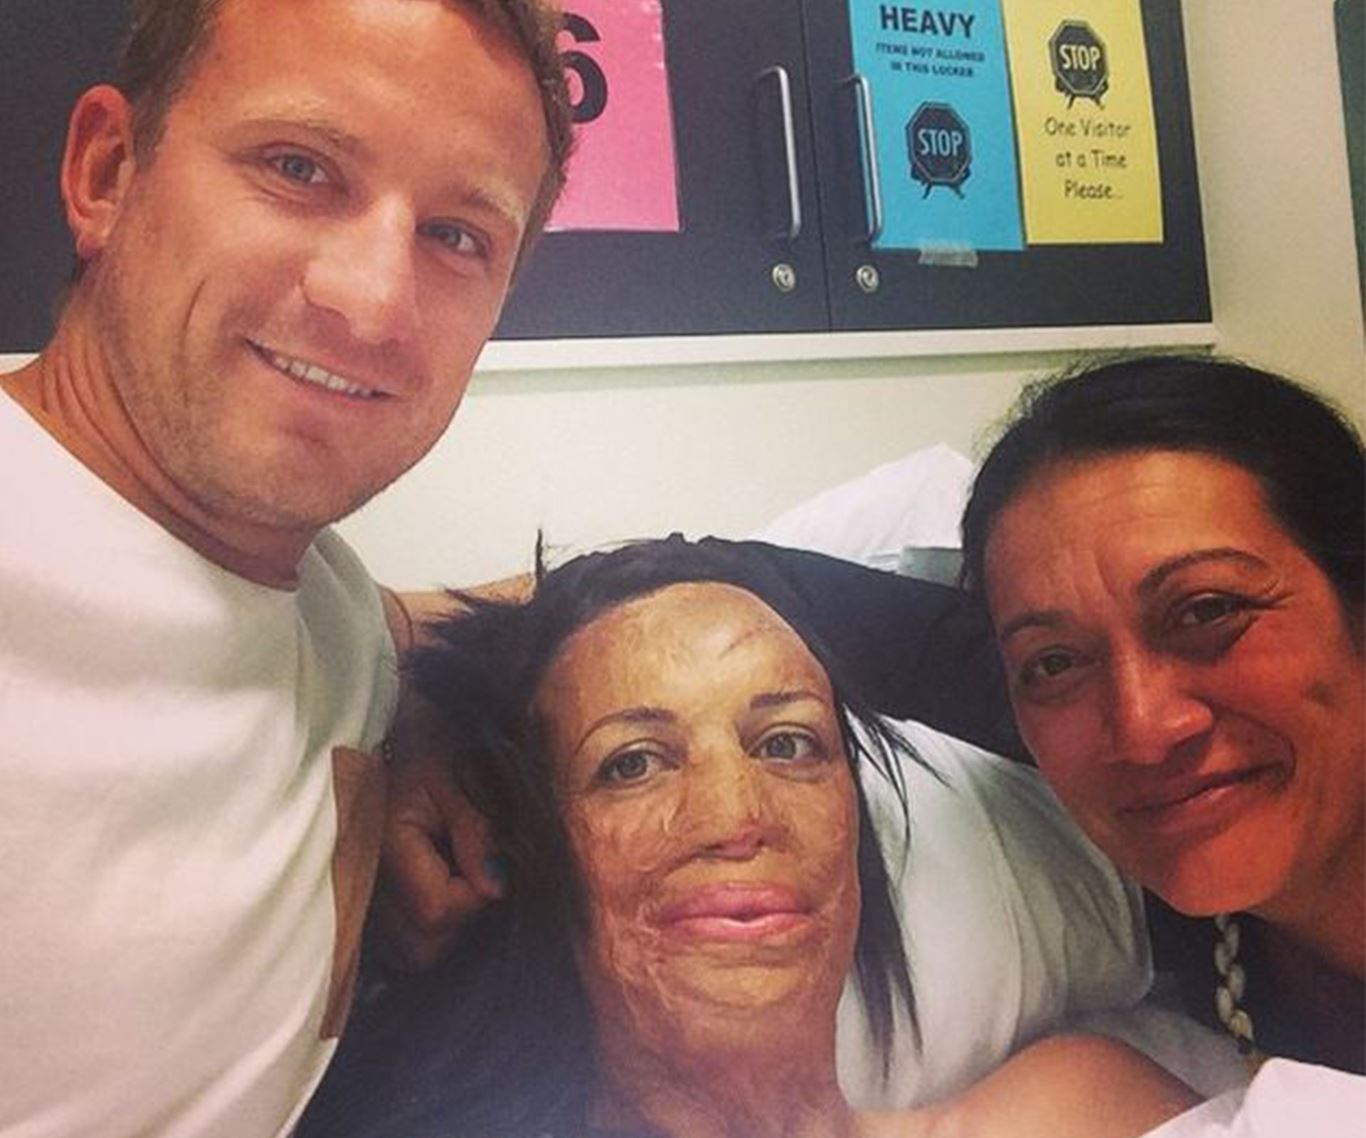 In pictures: Turia Pitt and Michael Hoskin's love story:But in 2011 Turia suffered burns to 65 per cent of her body, lost her fingers and thumb on her right hand and spent five months in hospital after she was trapped by a grassfire in a 100 kilometre ultra-marathon in the Kimberley.